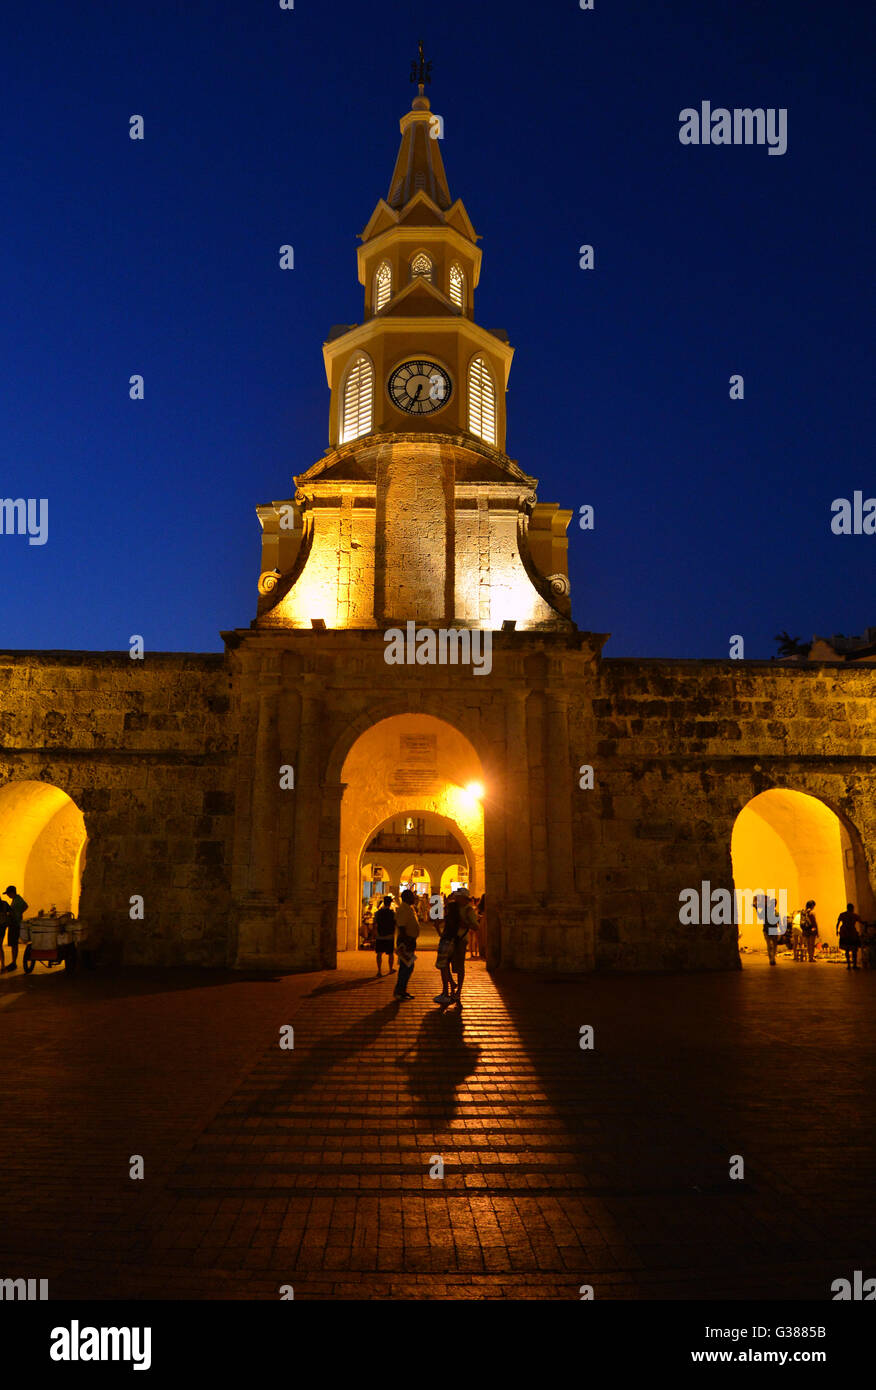 The Clock tower in the entrance to the old town of Cartagena Colombia Stock Photo